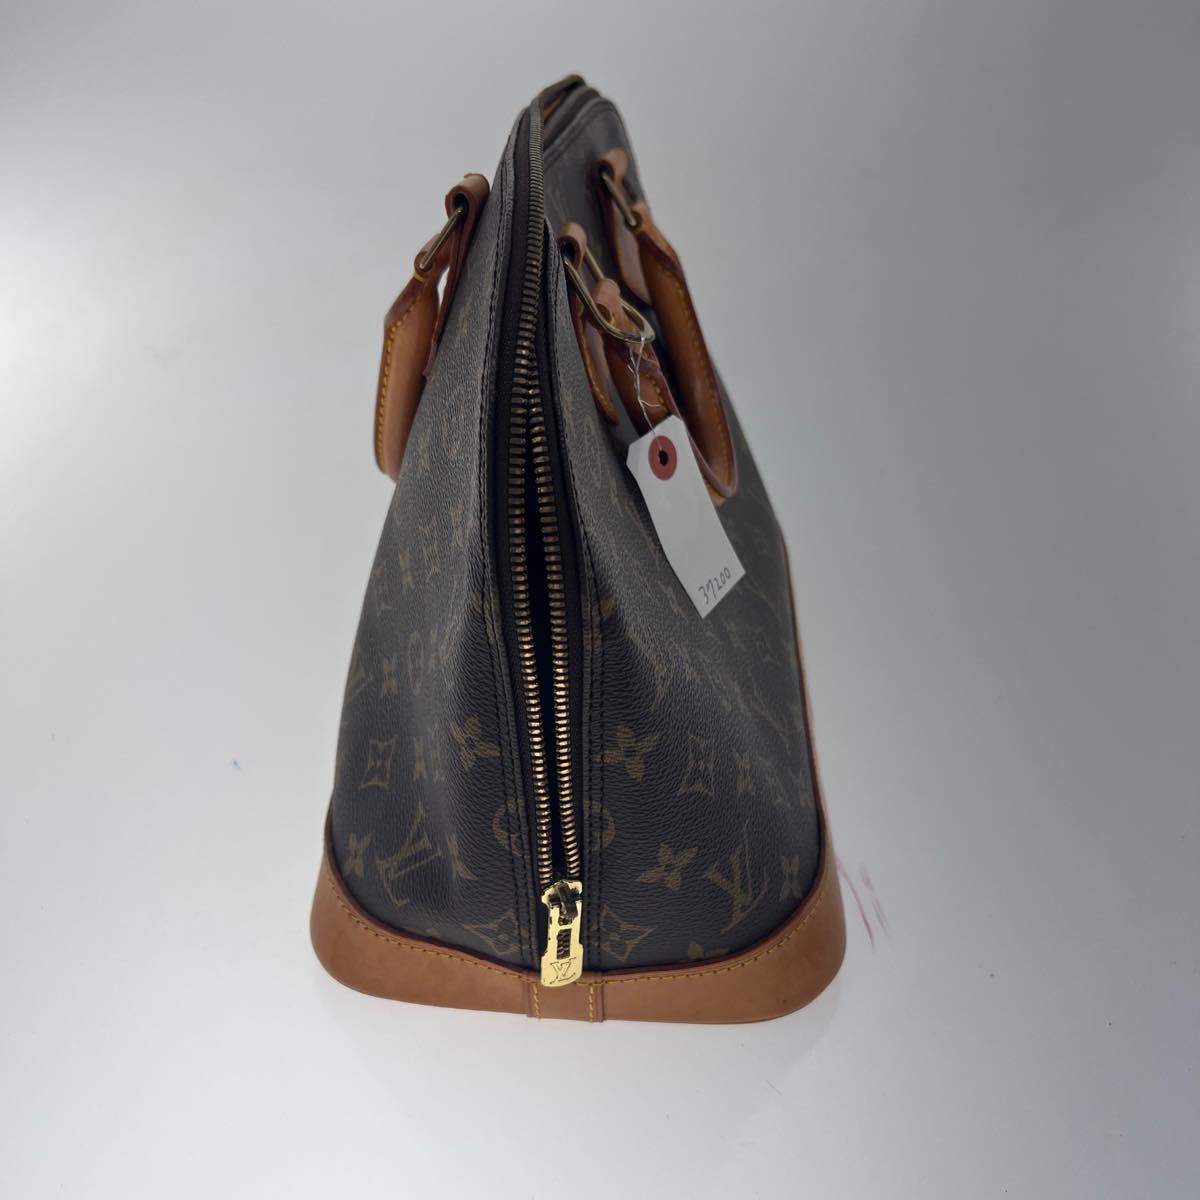 Buy [Used] LOUIS VUITTON Alma Handbag Monogram M51130 from Japan - Buy  authentic Plus exclusive items from Japan